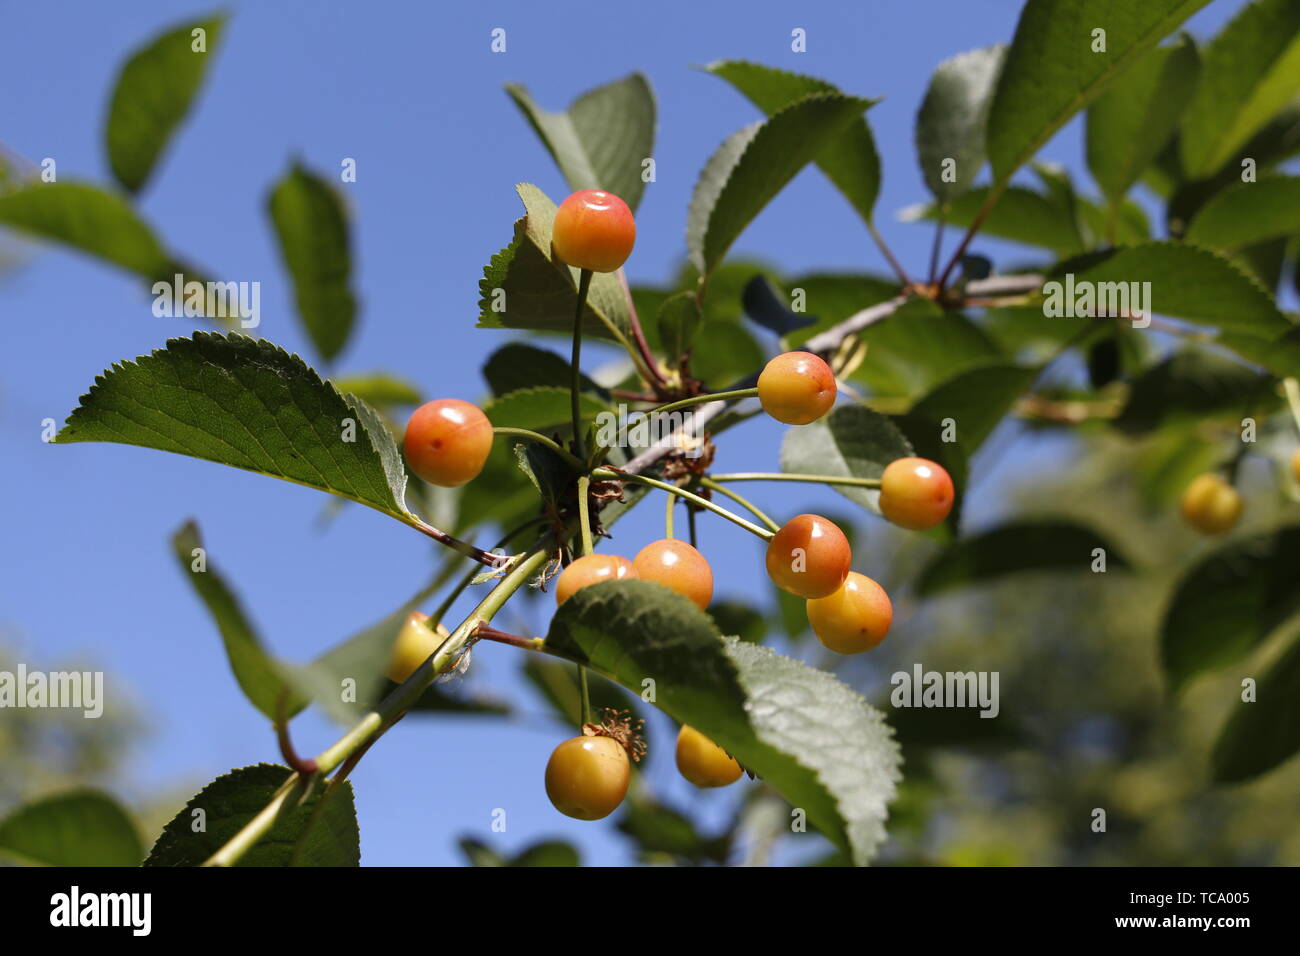 Cherry begins to ripen on a tree branch. Fruit cherry tree. Yellow cherry on a blue sky. Stock Photo